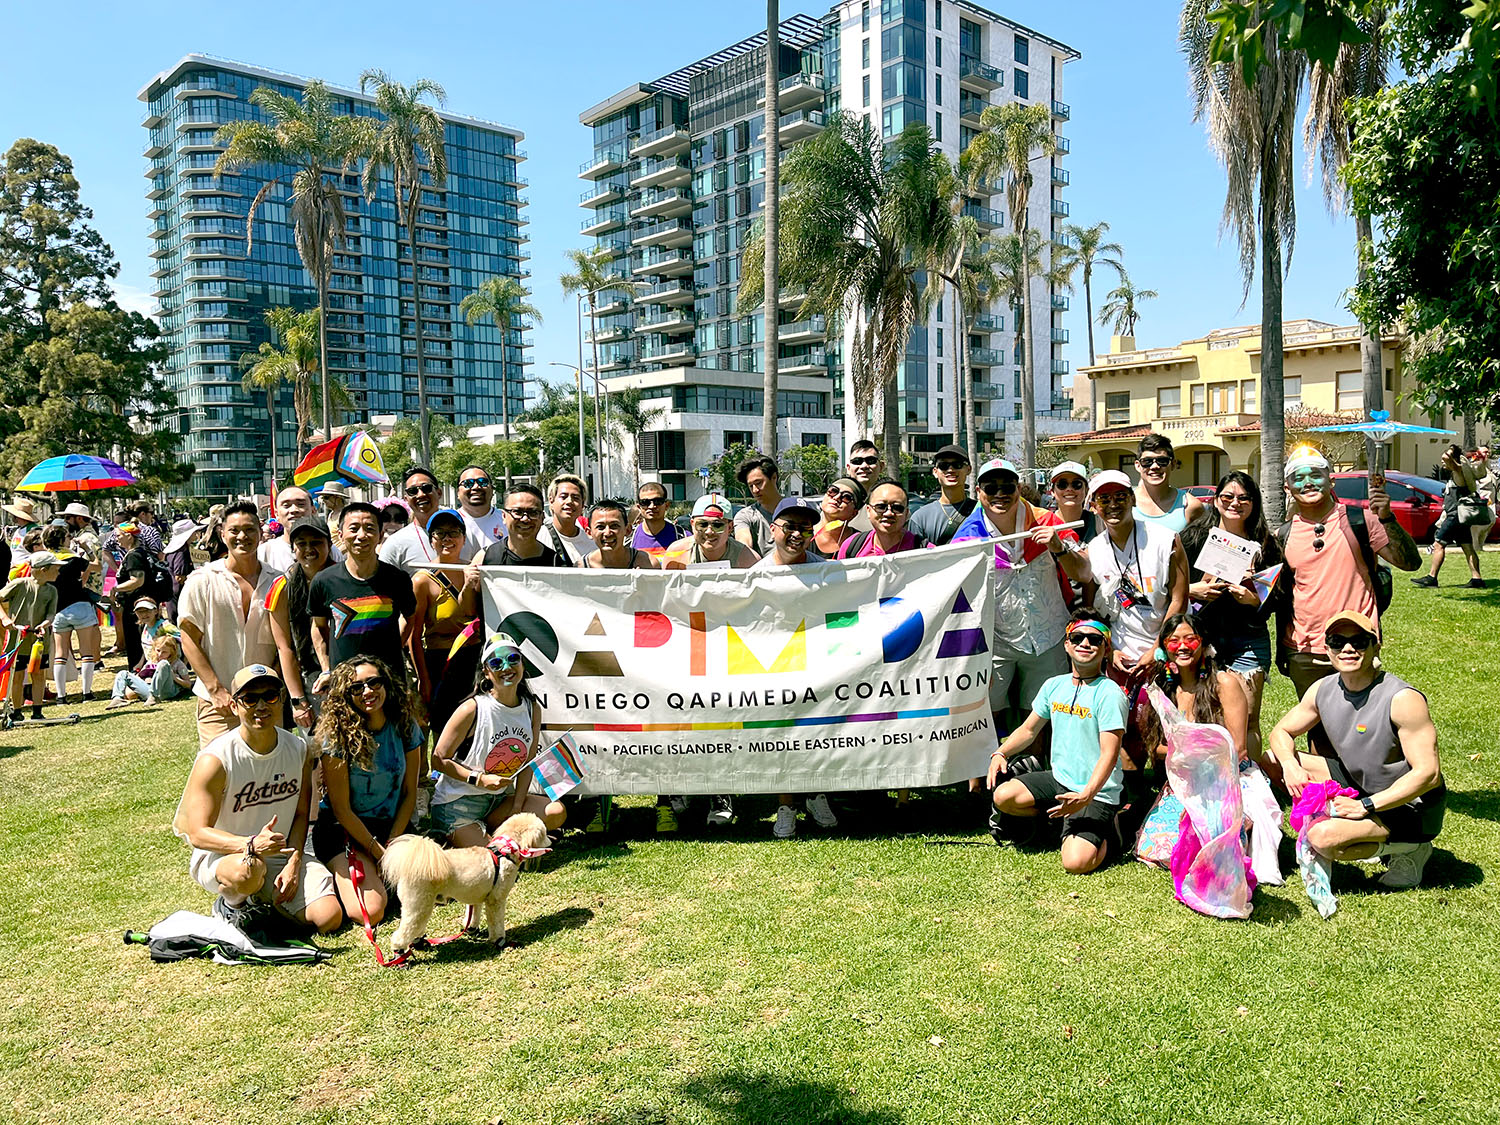 QAPIMEDA Coalition posing around banner outside in San Diego